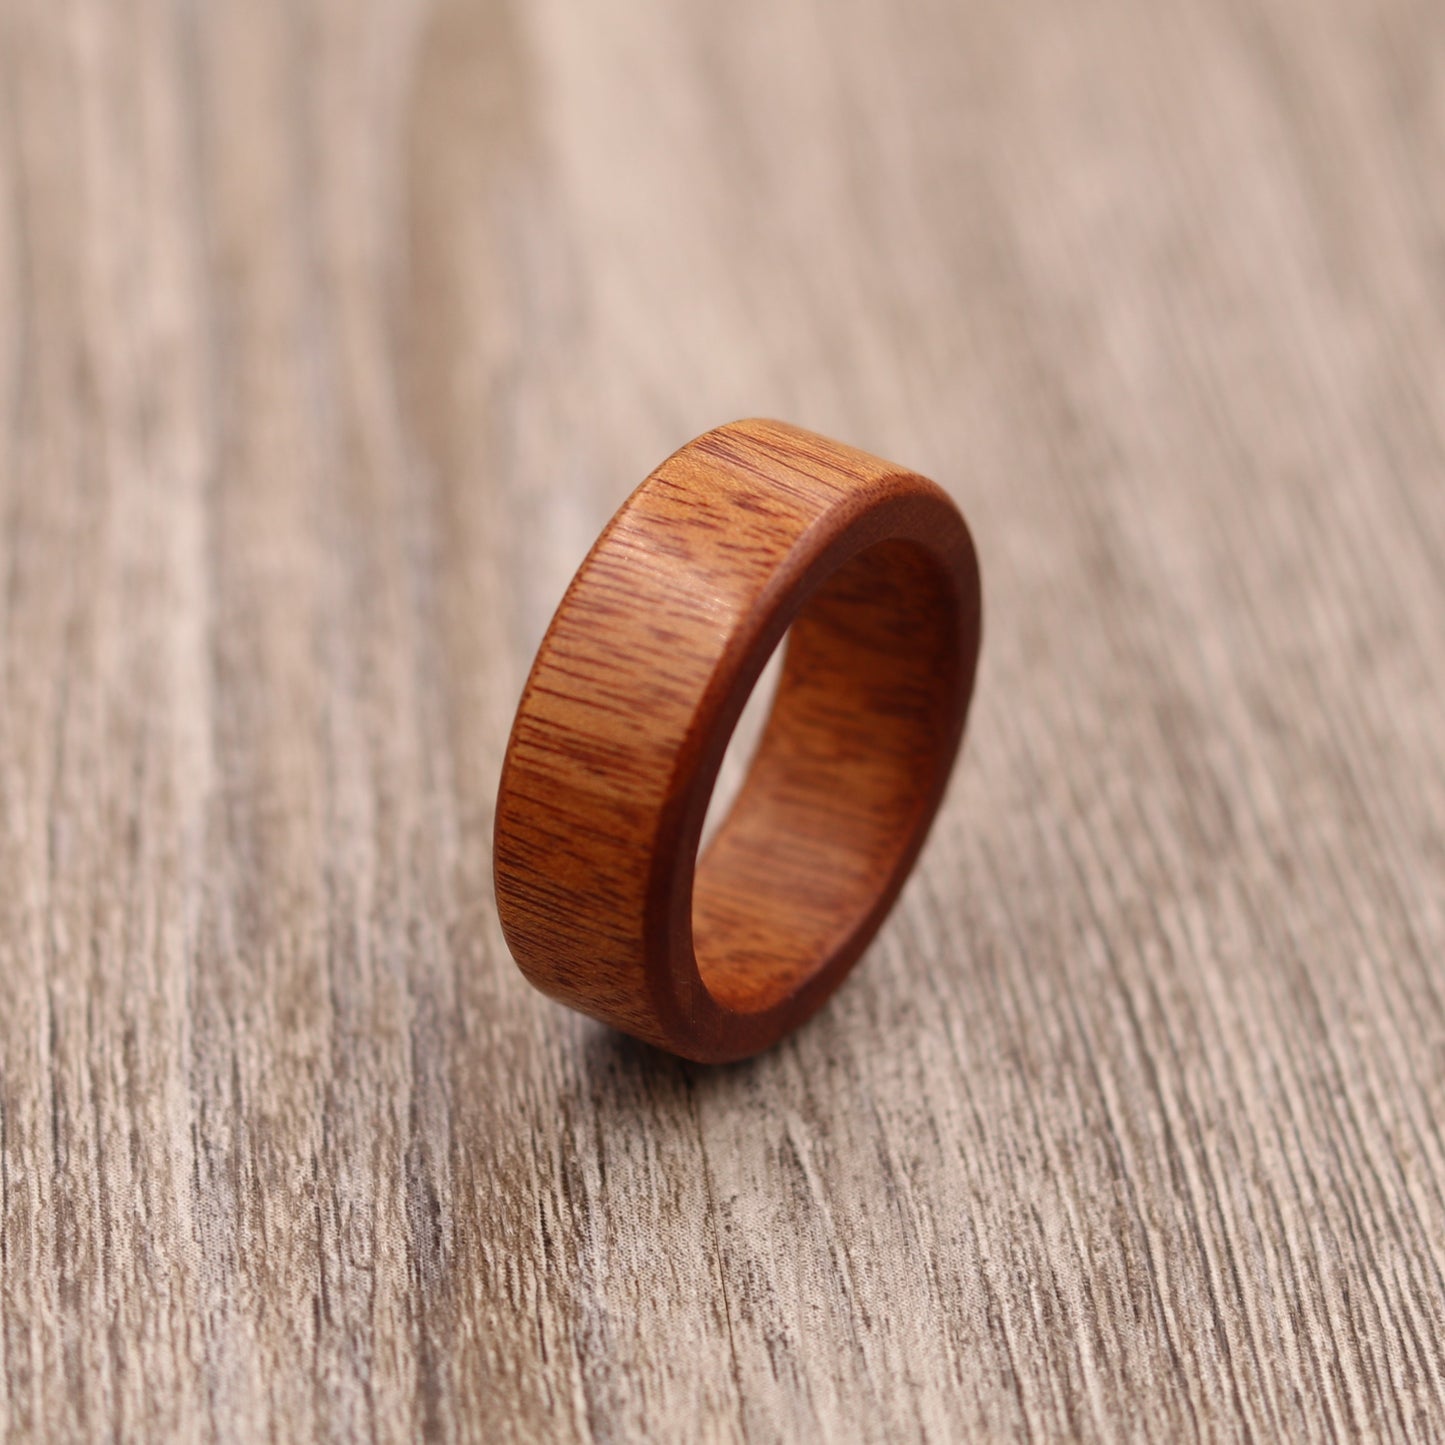 Mopani Wood Ring - Plain and/or Personalized